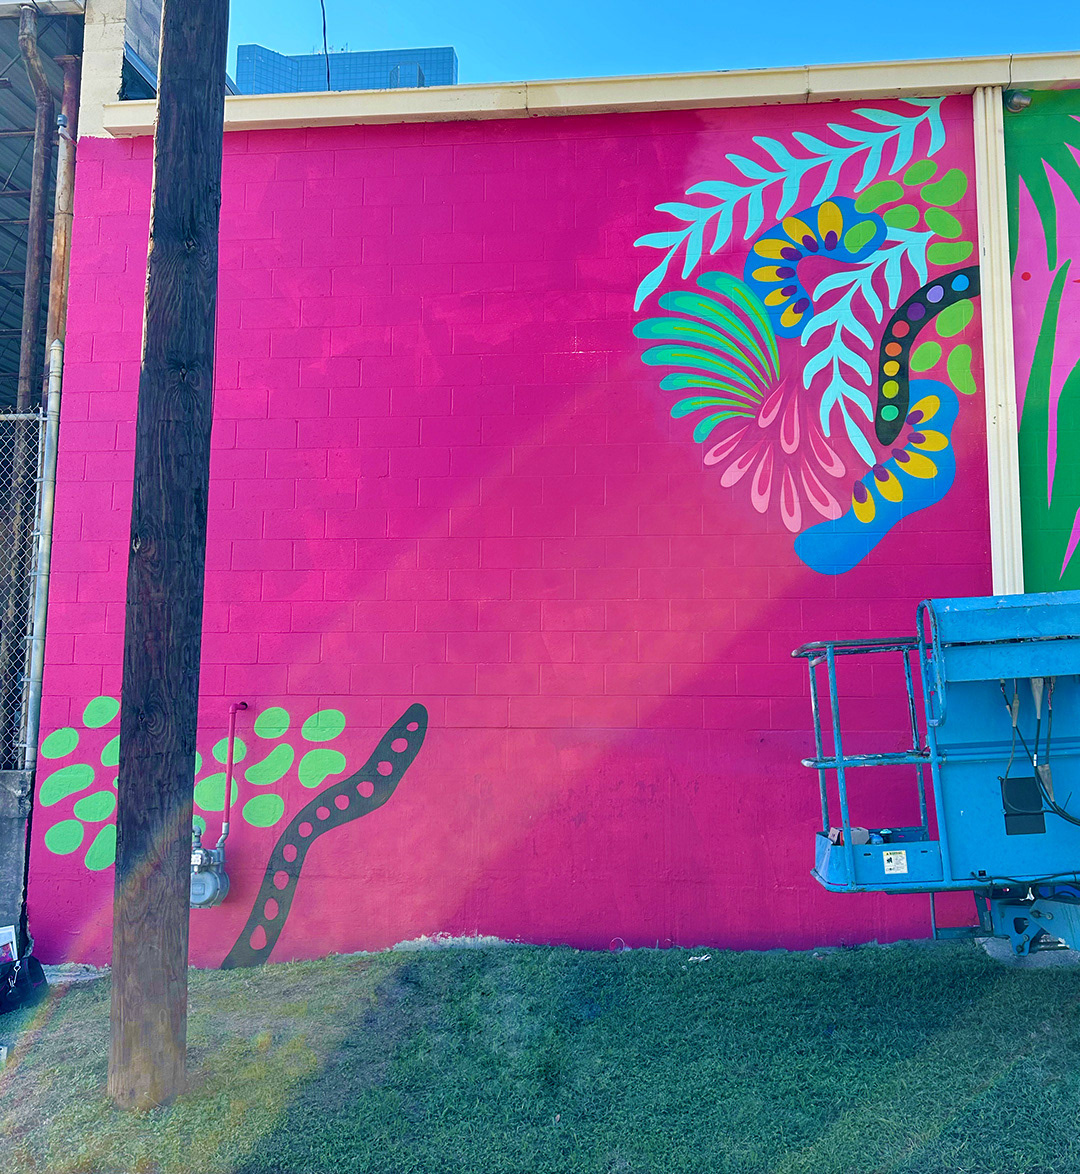 progress photo of mural painting with tropical details on bright pink background